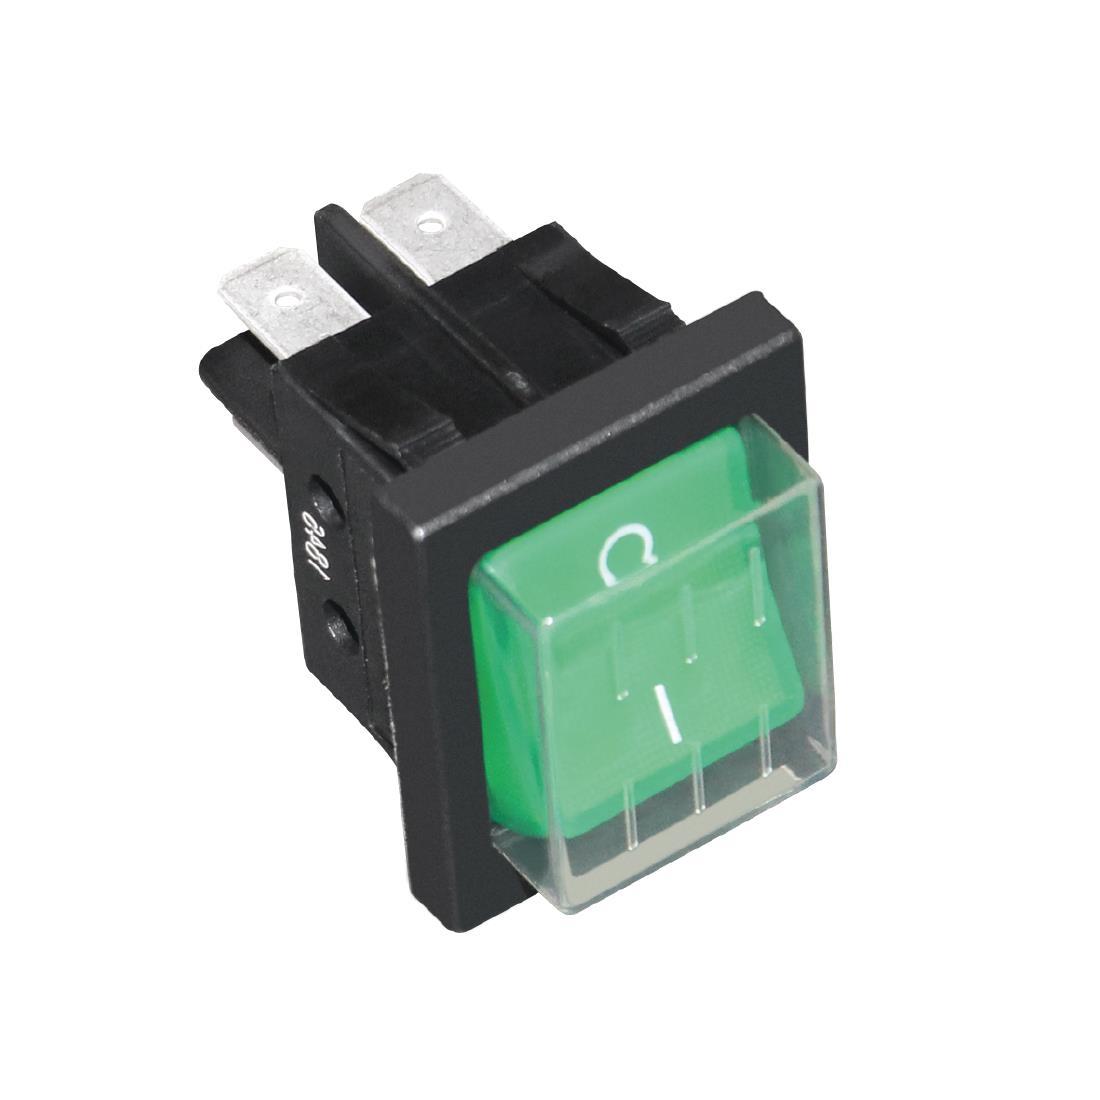 Replacement Main Switch - AB308  - 1